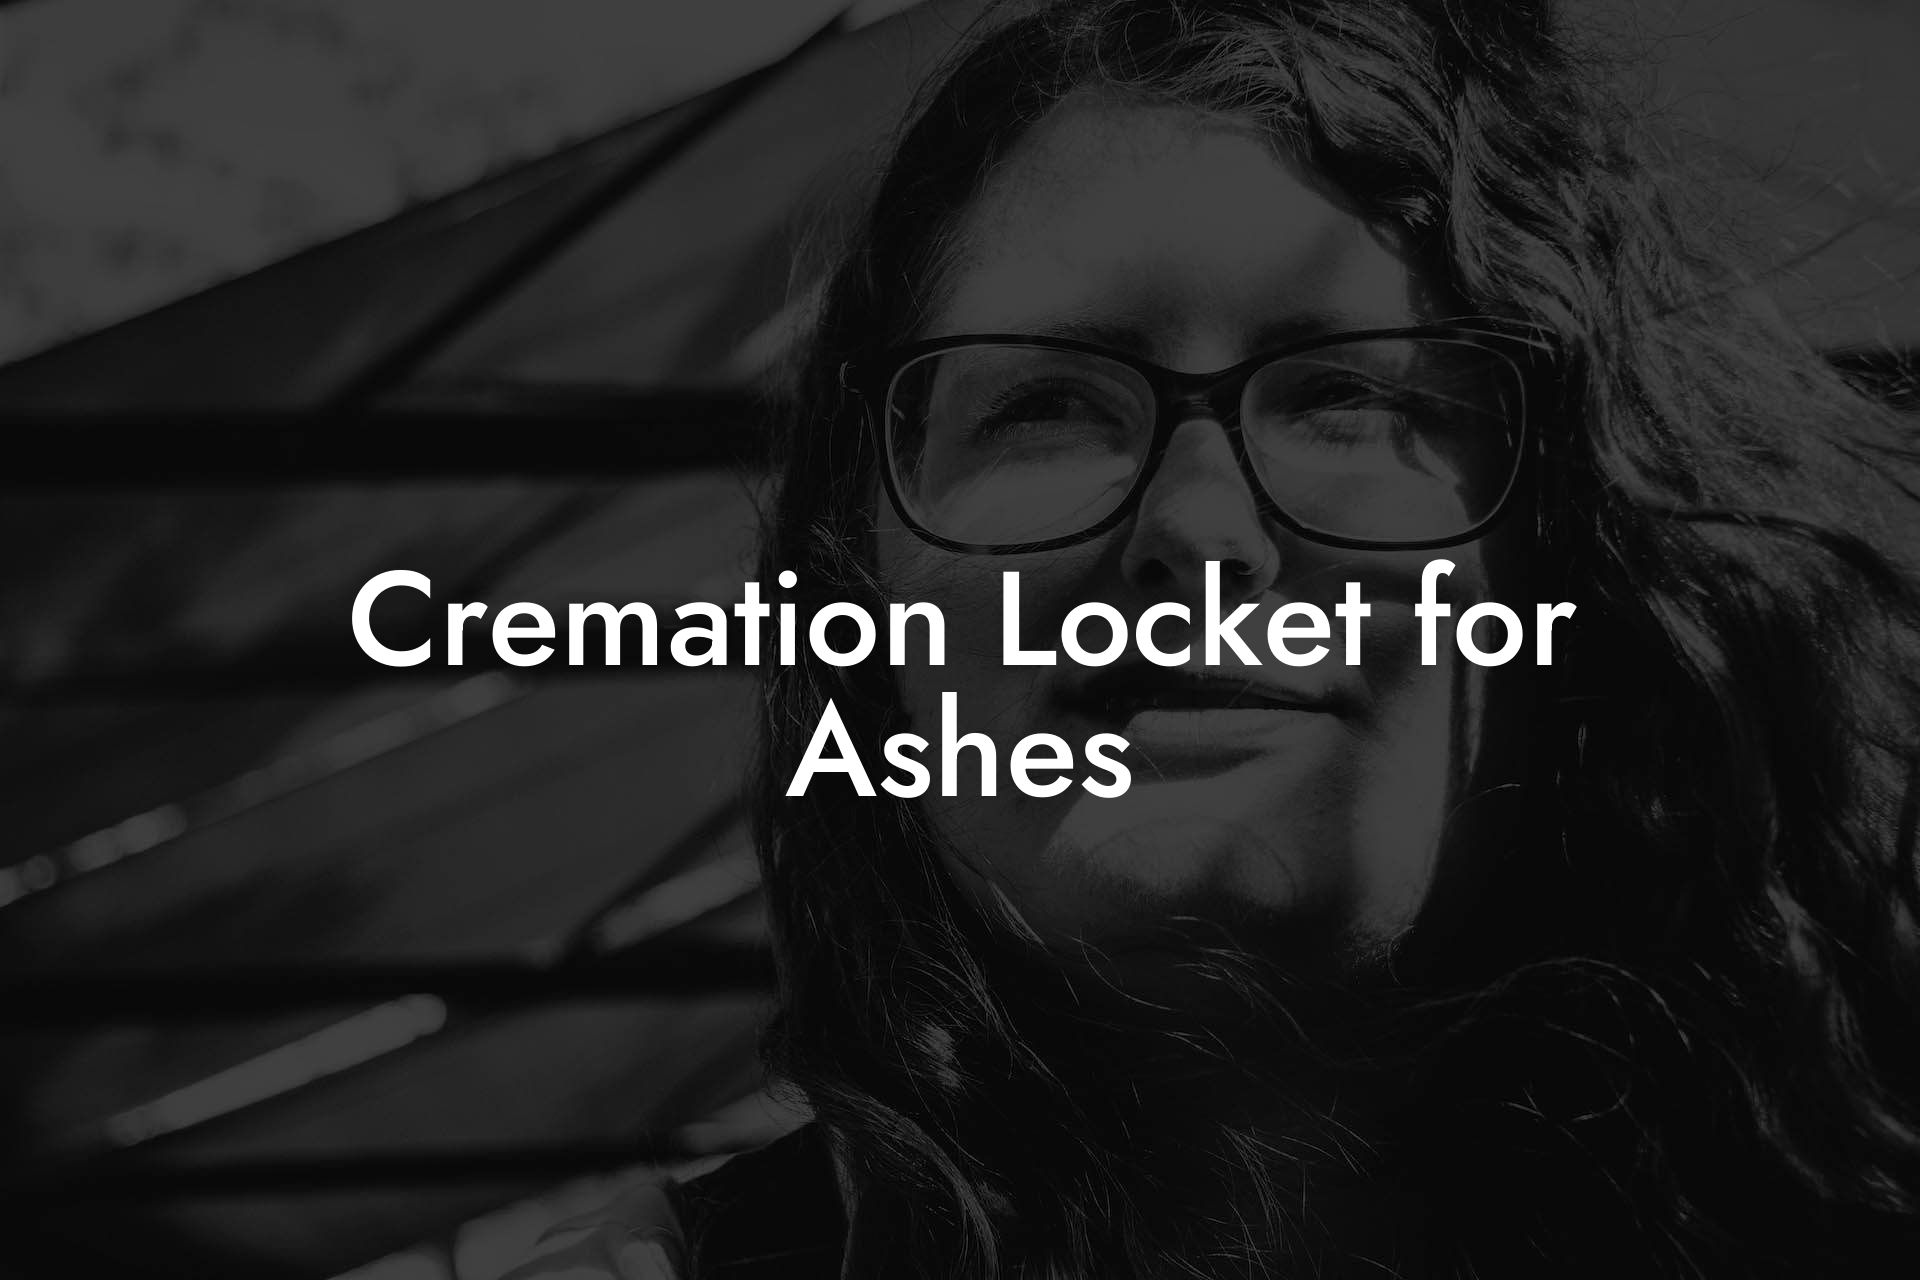 Cremation Locket for Ashes